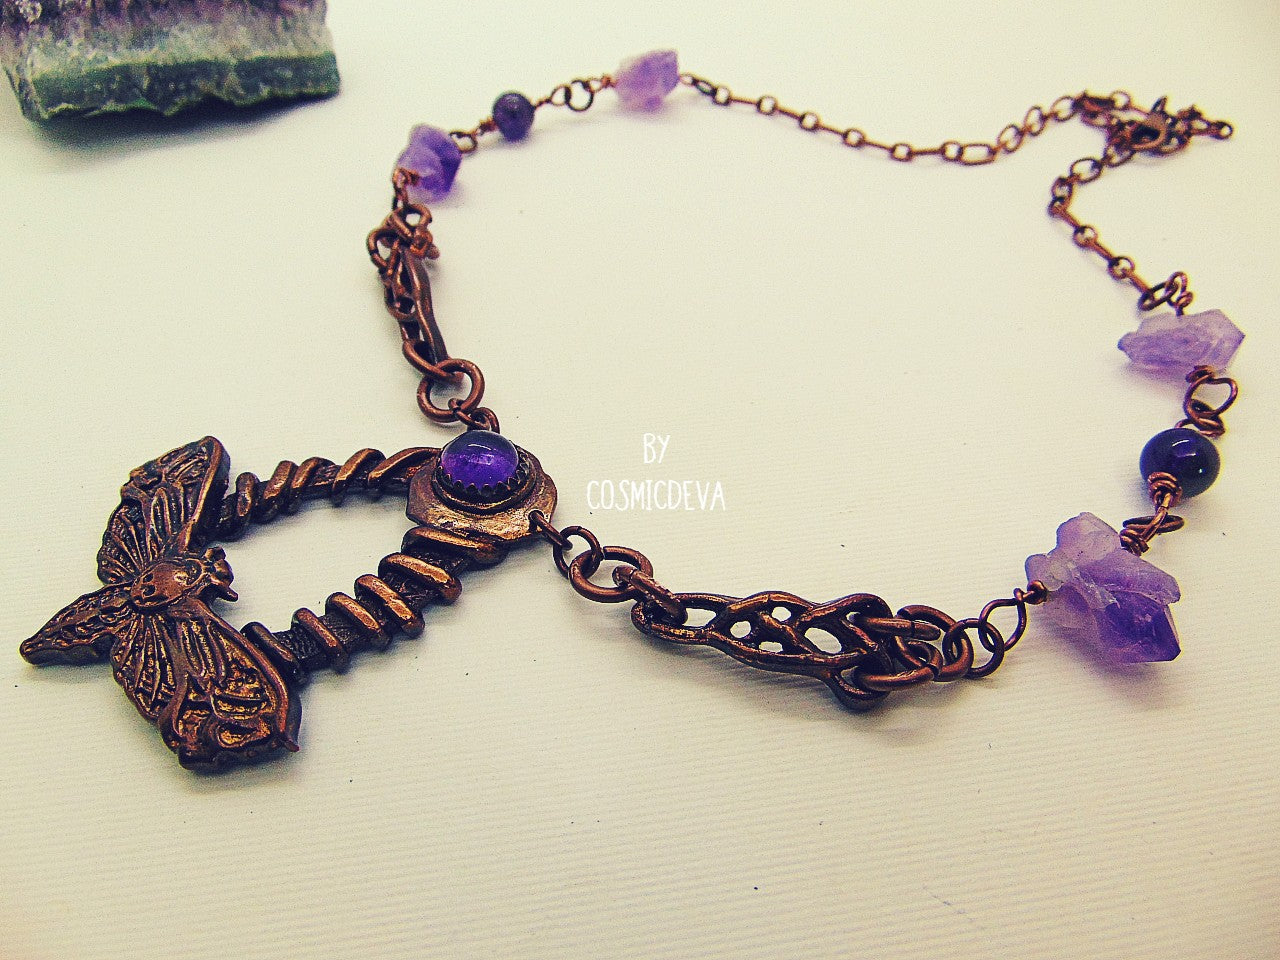 Handcrafted detailed death head hawk Moth (Acherontia) made of solid copper with a natural amethyst cabochon setting. The pendant is the focal point of a chain necklace with drilled natural raw amethyst gemstones, natural amethyst round beads and two completely handcrafted copper Celtic knot design findings.